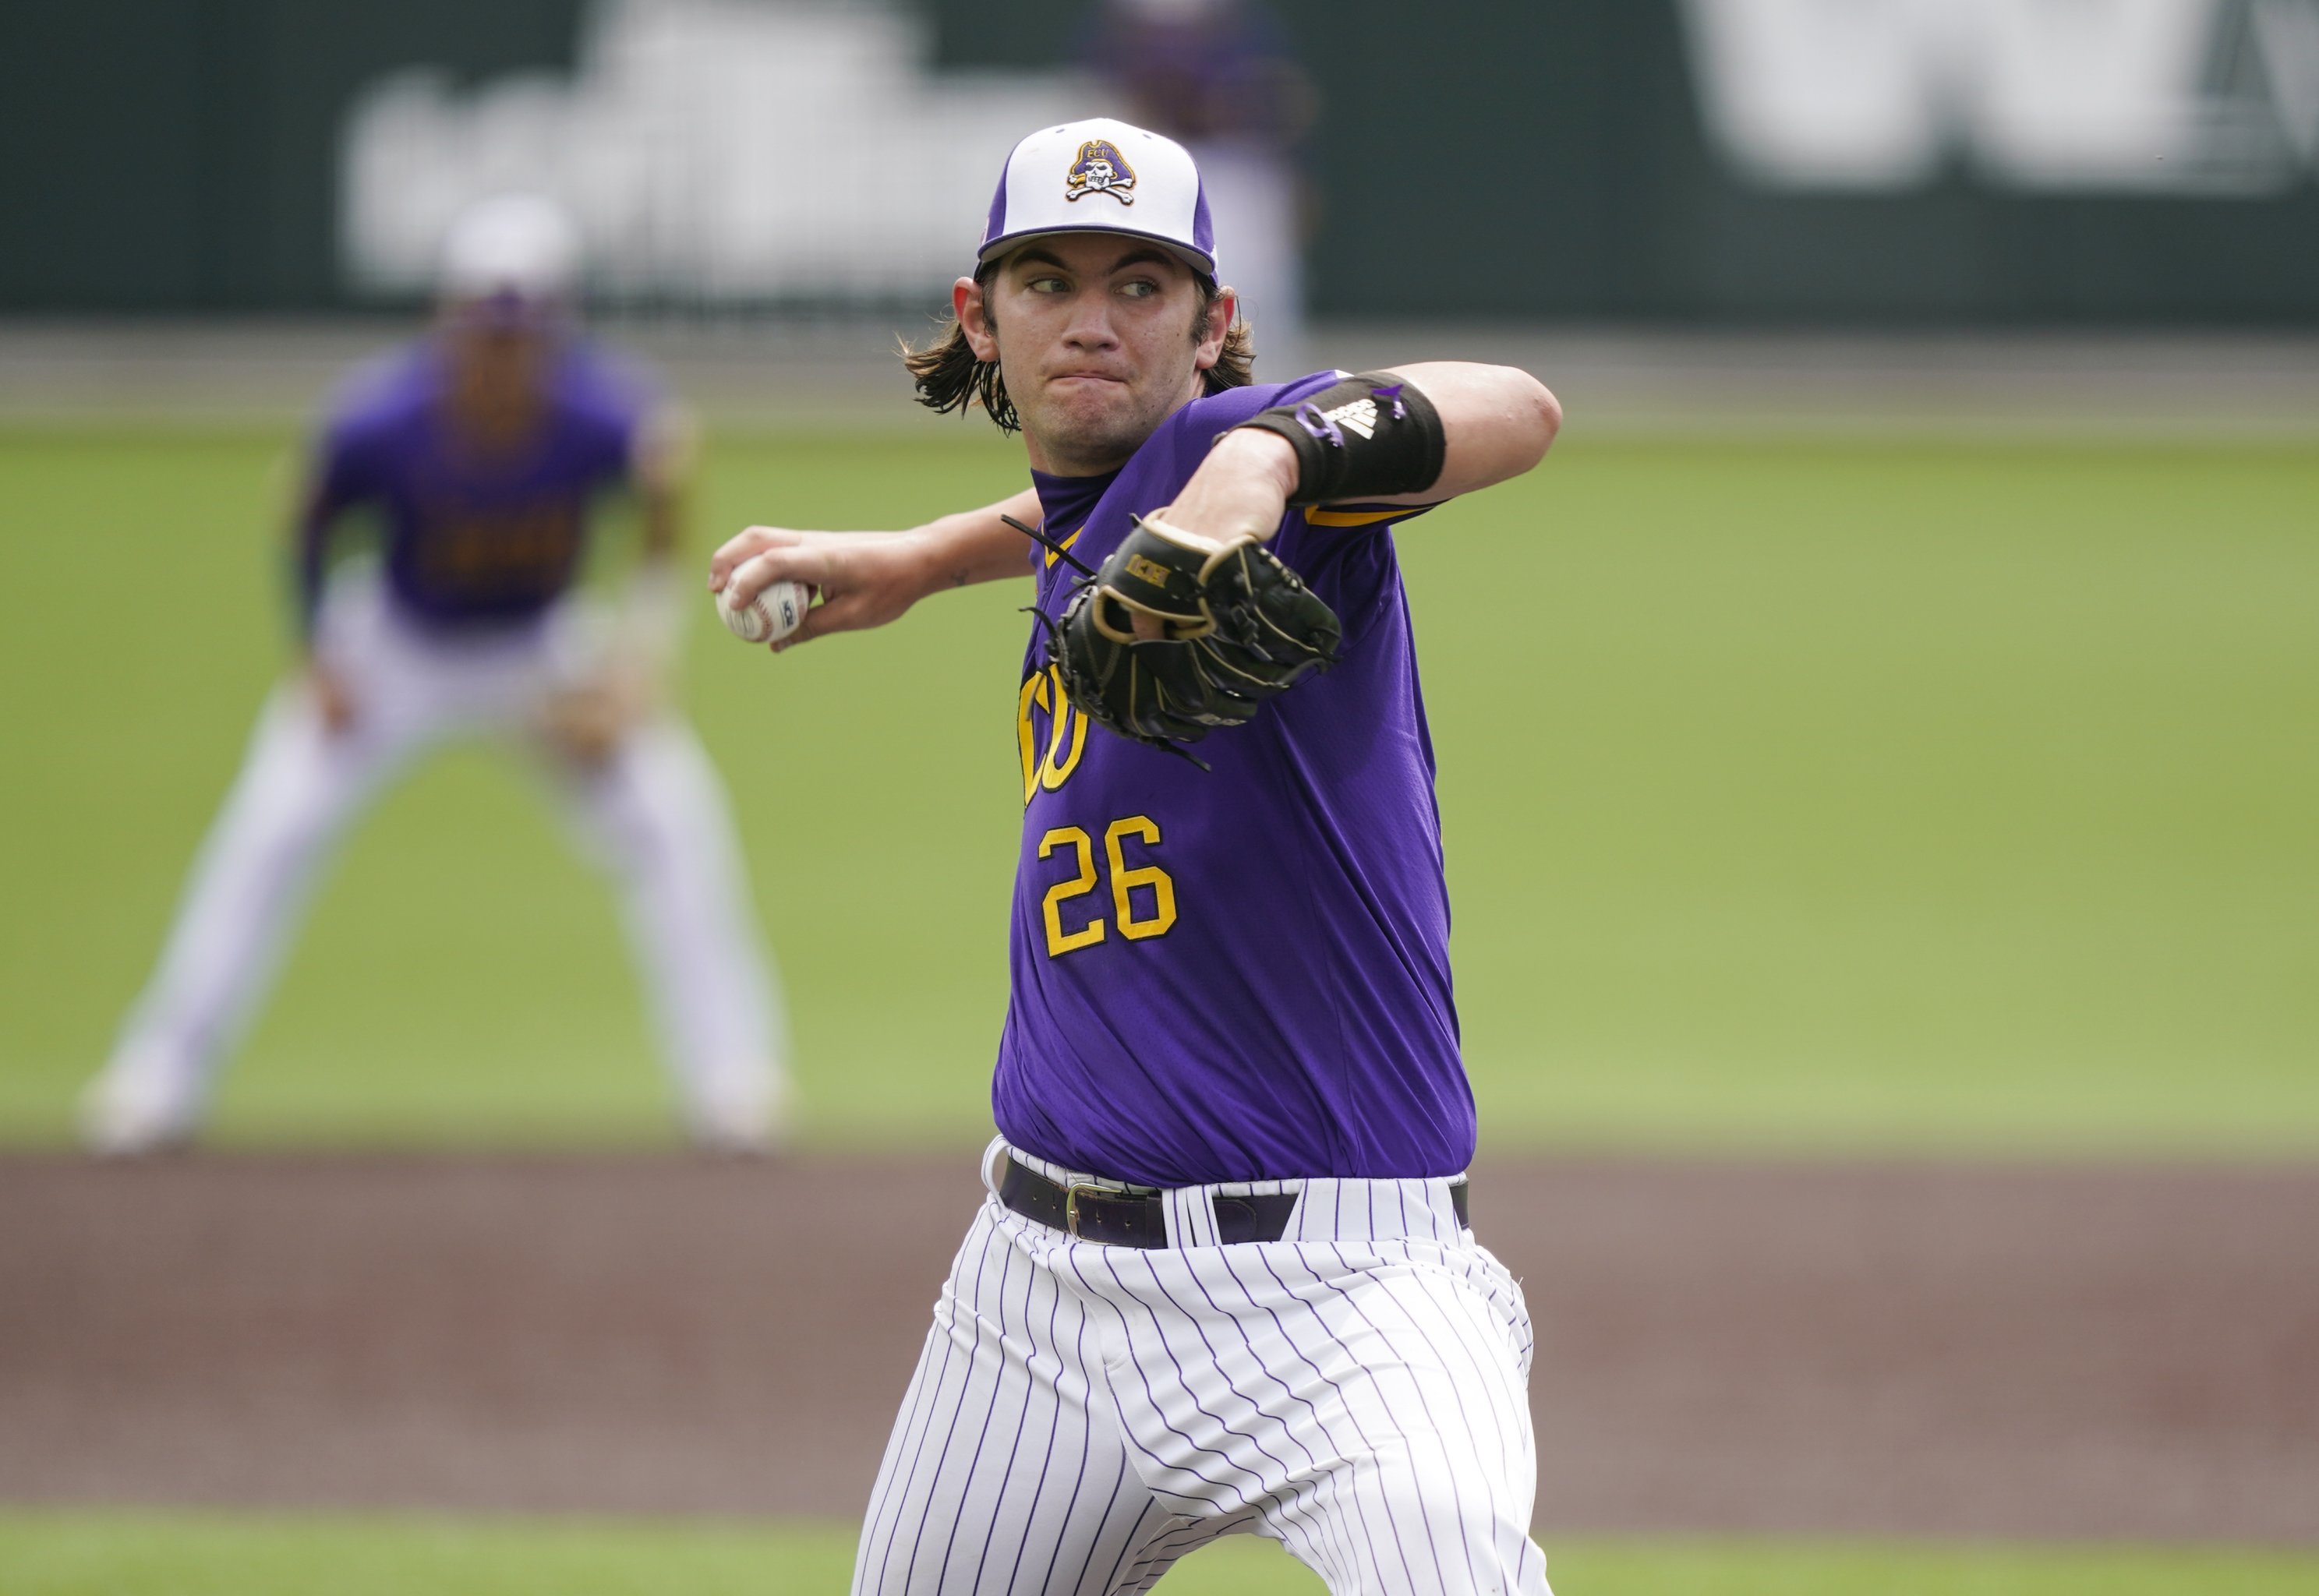 2021 MLB Mock Draft: Final Round Up on Draft Day - Battery Power